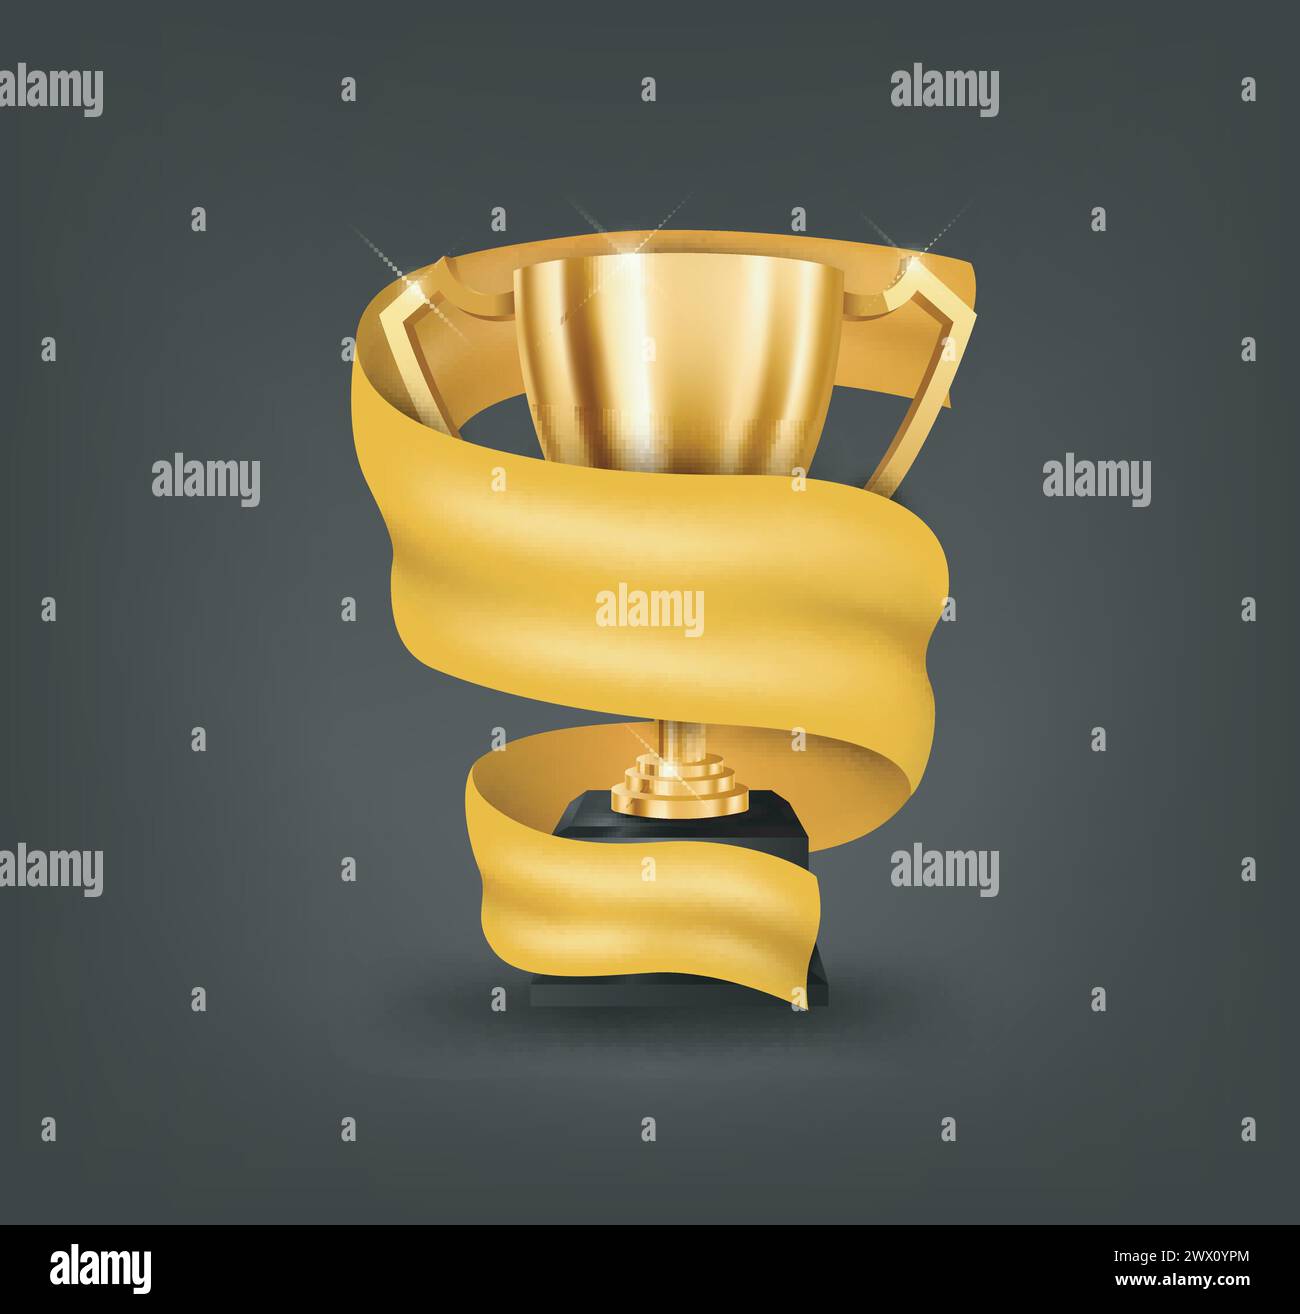 Trophies Wrapped in A Revolving Cloth, Vector Illustration Stock Vector